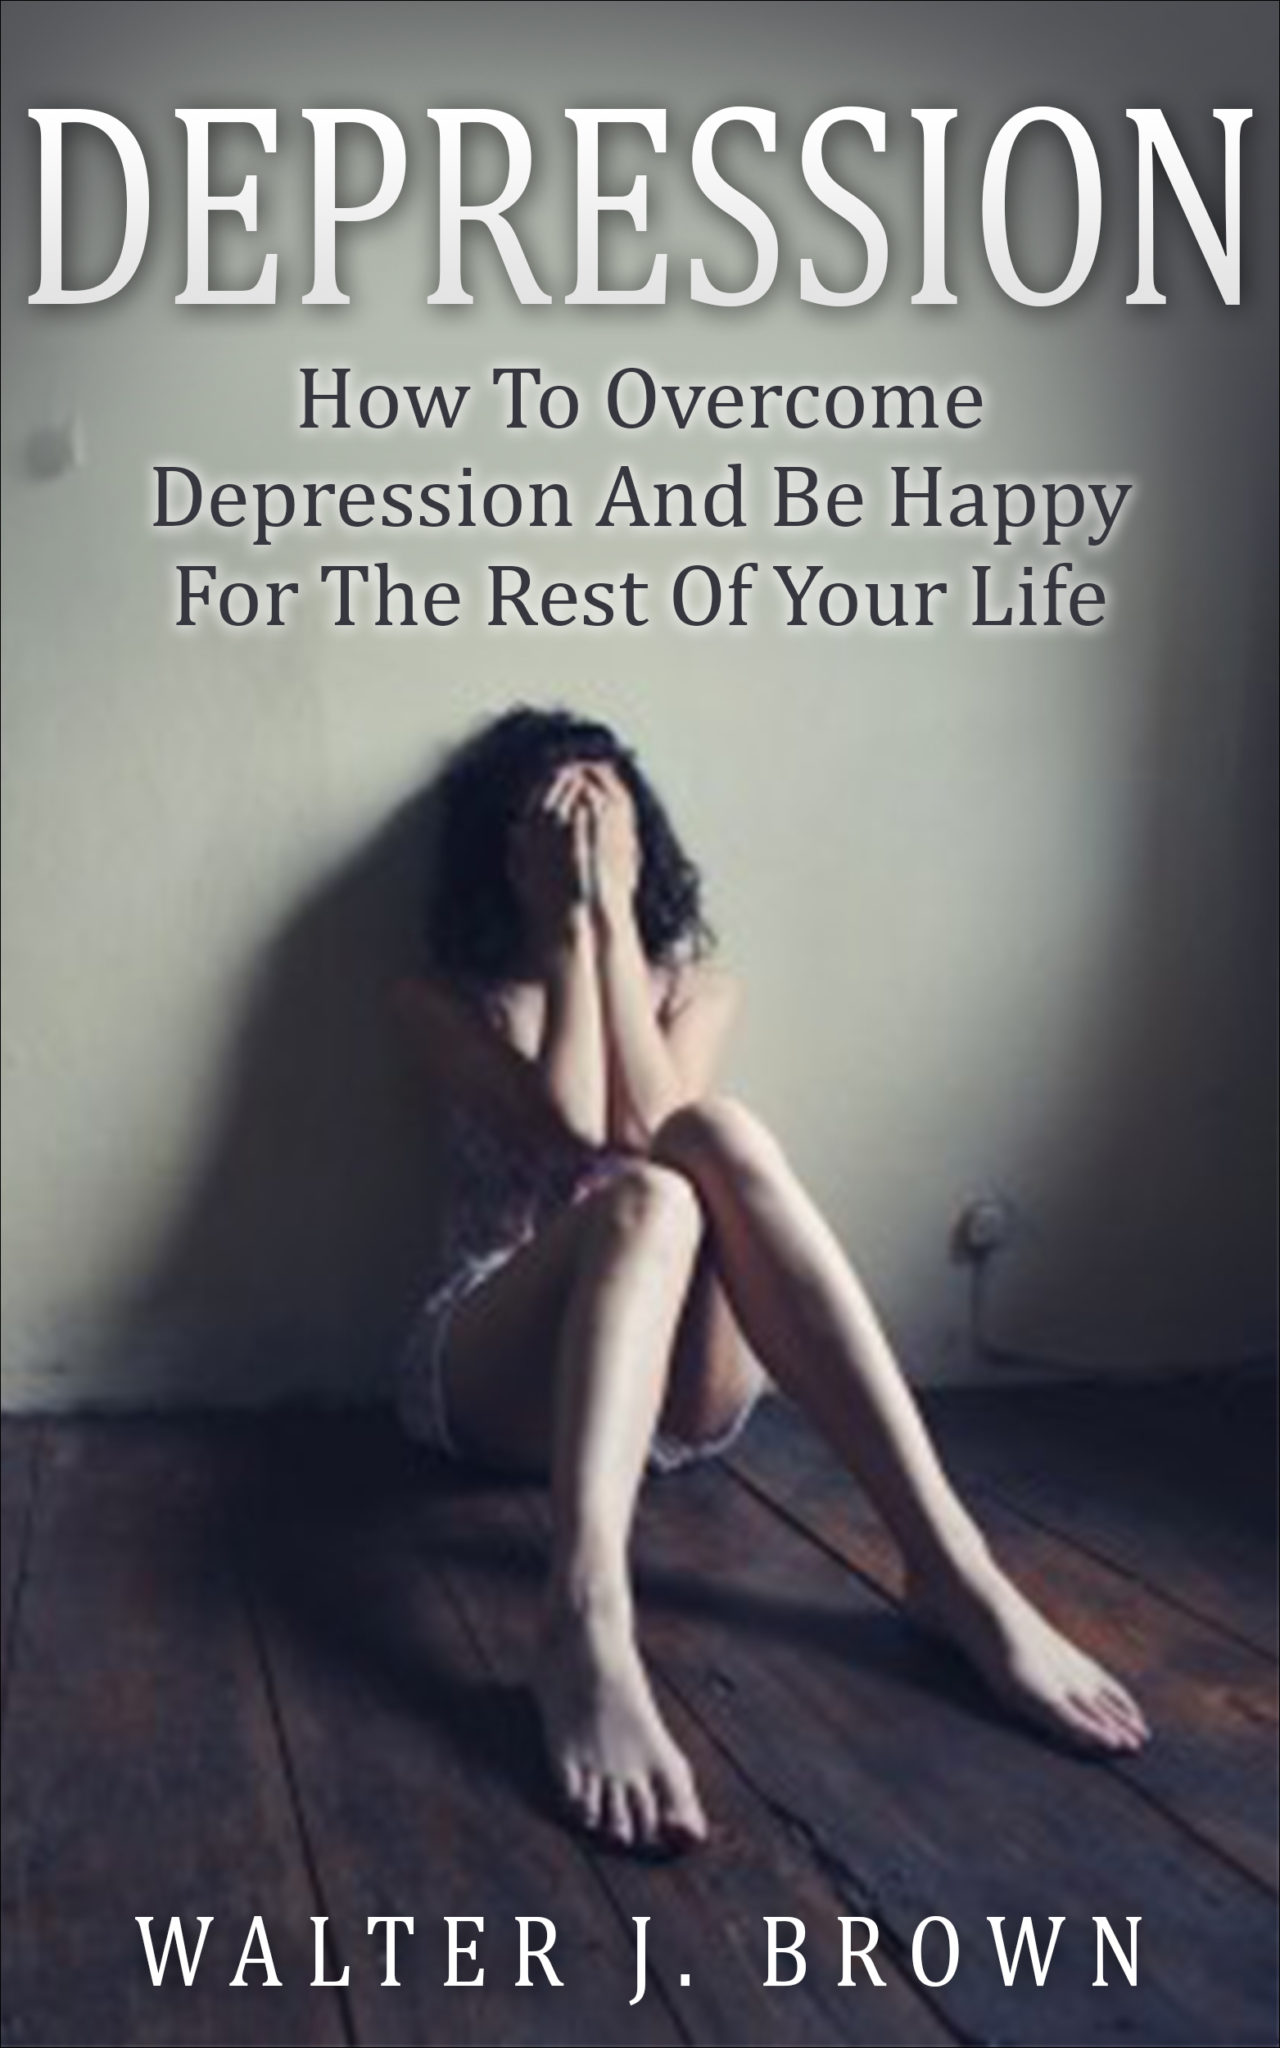 Depression: How To Overcome Depression And Be Happy For The Rest Of Your Life by Walter James Brown